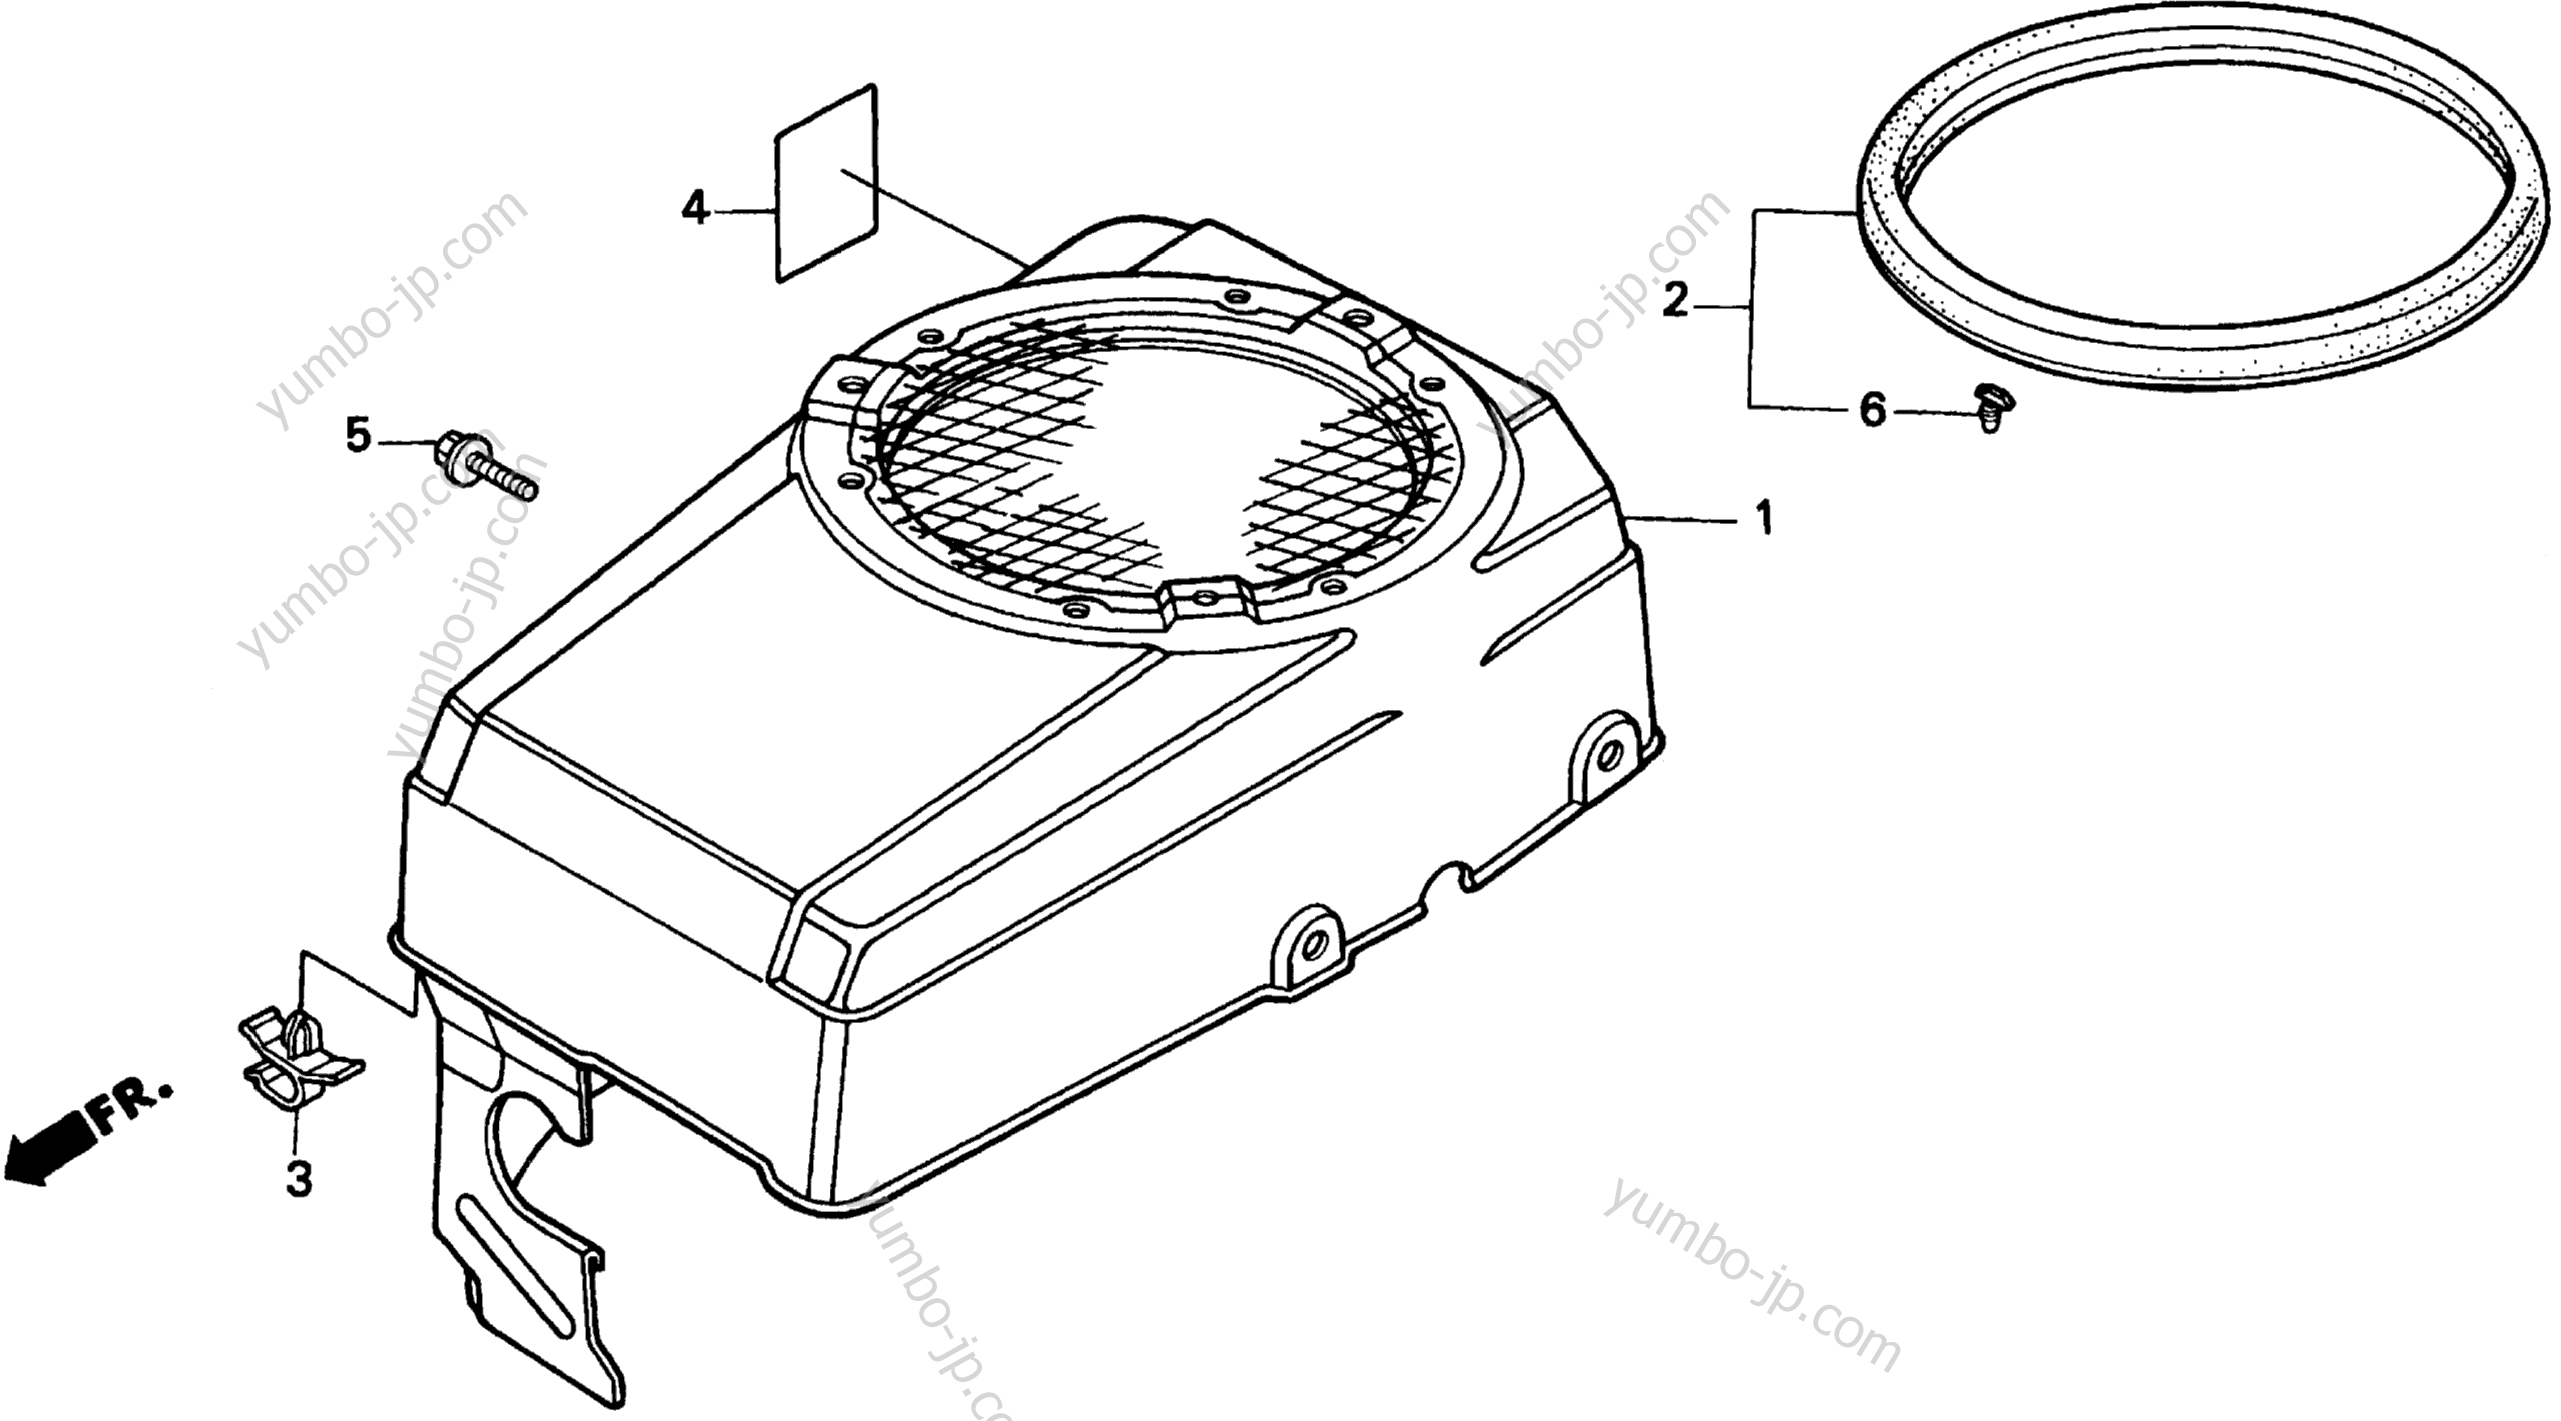 FAN COVER for lawn mowers HONDA H3013H HSA 